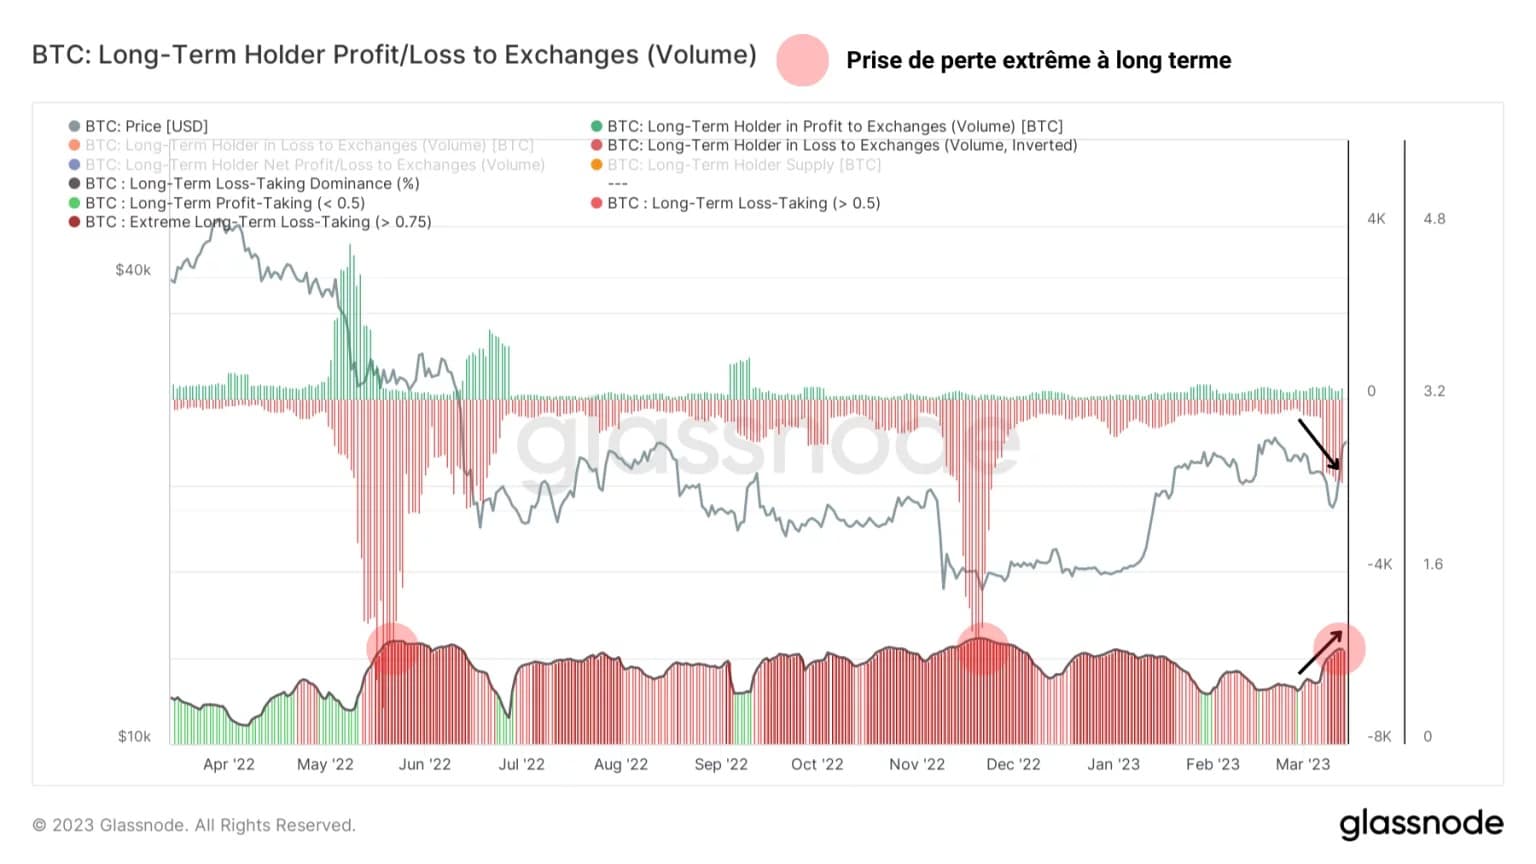 Figure 3: Volume in profit/loss from LTH to exchanges